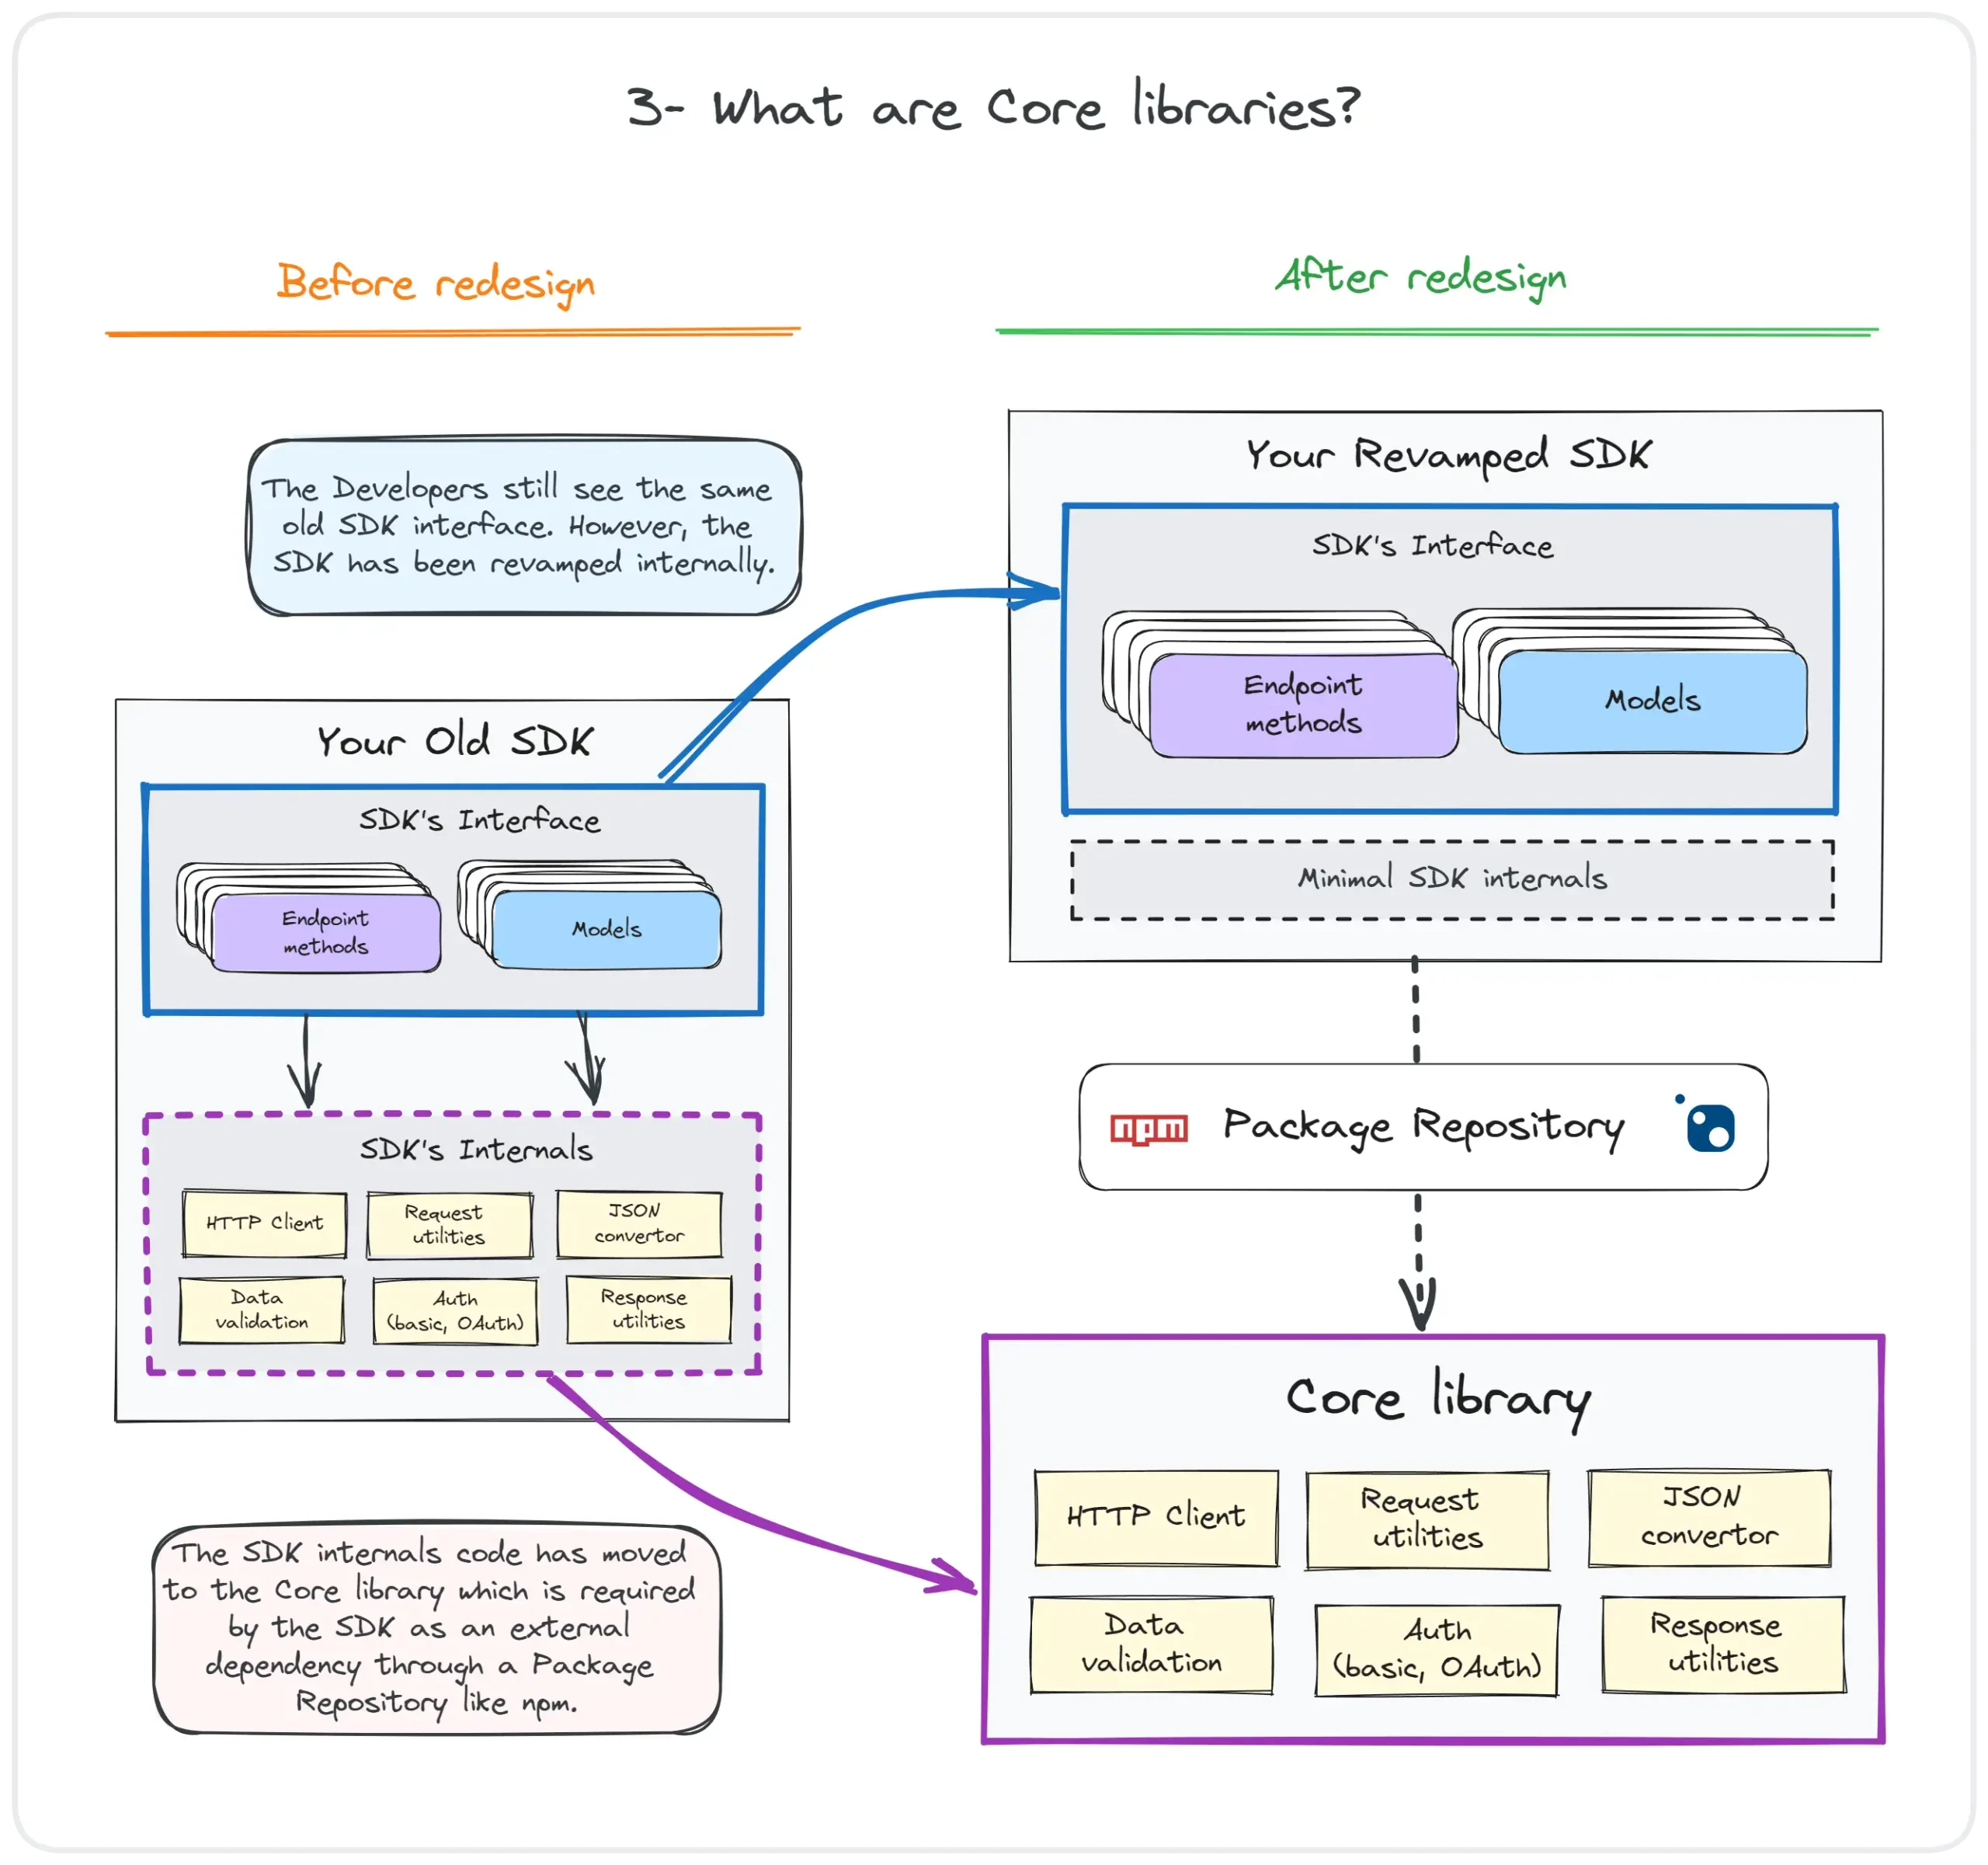 What are Core libraries?